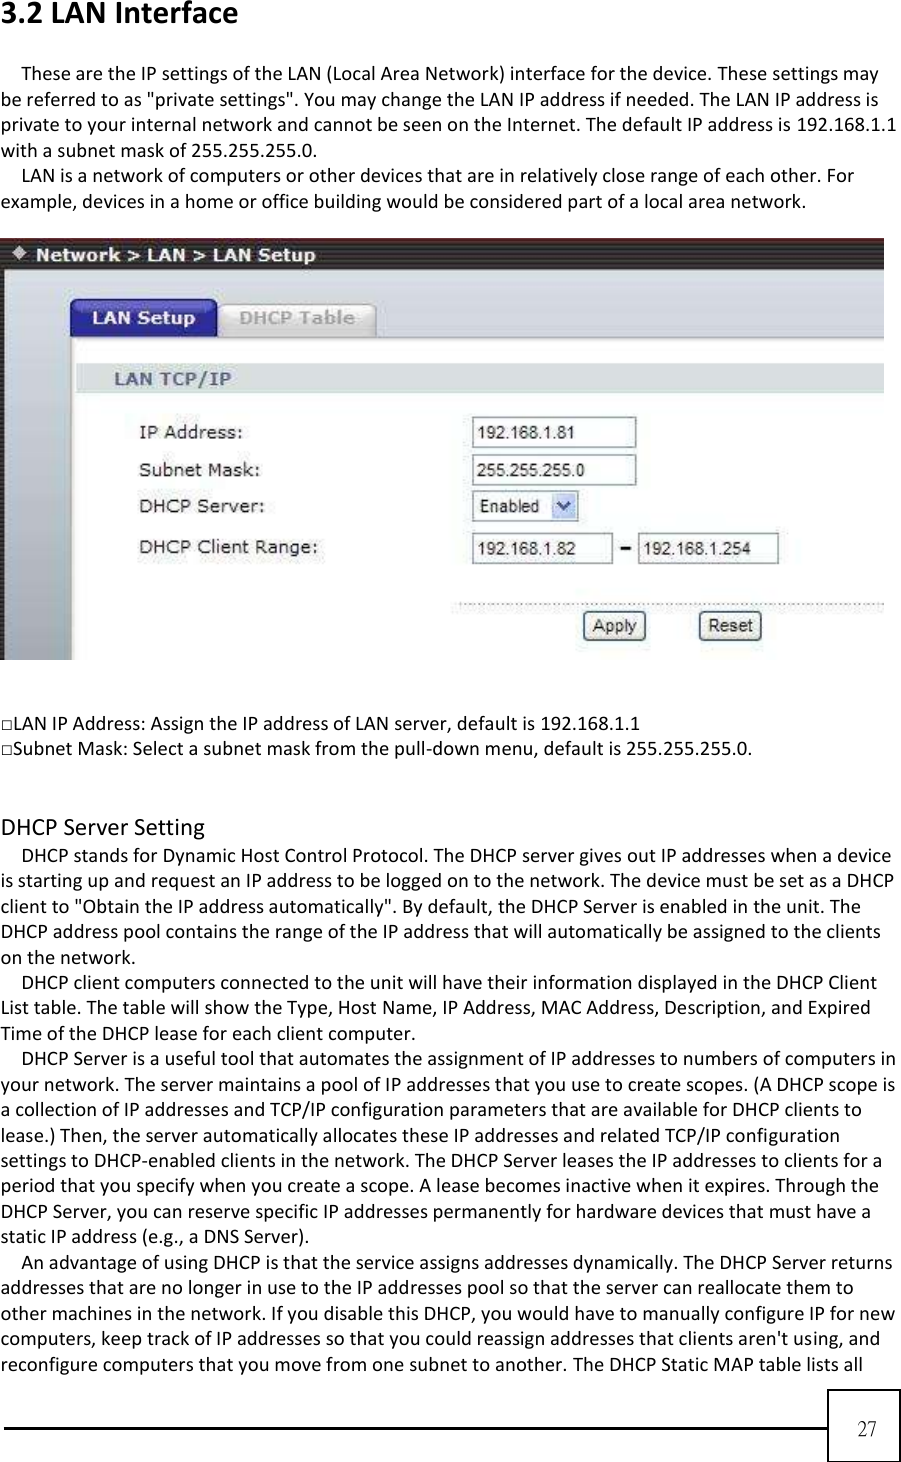  27  3.2 LAN Interface  These are the IP settings of the LAN (Local Area Network) interface for the device. These settings may be referred to as &quot;private settings&quot;. You may change the LAN IP address if needed. The LAN IP address is private to your internal network and cannot be seen on the Internet. The default IP address is 192.168.1.1 with a subnet mask of 255.255.255.0.   LAN is a network of computers or other devices that are in relatively close range of each other. For example, devices in a home or office building would be considered part of a local area network.           □LAN IP Address: Assign the IP address of LAN server, default is 192.168.1.1   □Subnet Mask: Select a subnet mask from the pull-down menu, default is 255.255.255.0.     DHCP Server Setting DHCP stands for Dynamic Host Control Protocol. The DHCP server gives out IP addresses when a device is starting up and request an IP address to be logged on to the network. The device must be set as a DHCP client to &quot;Obtain the IP address automatically&quot;. By default, the DHCP Server is enabled in the unit. The DHCP address pool contains the range of the IP address that will automatically be assigned to the clients on the network.   DHCP client computers connected to the unit will have their information displayed in the DHCP Client List table. The table will show the Type, Host Name, IP Address, MAC Address, Description, and Expired Time of the DHCP lease for each client computer.     DHCP Server is a useful tool that automates the assignment of IP addresses to numbers of computers in your network. The server maintains a pool of IP addresses that you use to create scopes. (A DHCP scope is a collection of IP addresses and TCP/IP configuration parameters that are available for DHCP clients to lease.) Then, the server automatically allocates these IP addresses and related TCP/IP configuration settings to DHCP-enabled clients in the network. The DHCP Server leases the IP addresses to clients for a period that you specify when you create a scope. A lease becomes inactive when it expires. Through the DHCP Server, you can reserve specific IP addresses permanently for hardware devices that must have a static IP address (e.g., a DNS Server).     An advantage of using DHCP is that the service assigns addresses dynamically. The DHCP Server returns addresses that are no longer in use to the IP addresses pool so that the server can reallocate them to other machines in the network. If you disable this DHCP, you would have to manually configure IP for new computers, keep track of IP addresses so that you could reassign addresses that clients aren&apos;t using, and reconfigure computers that you move from one subnet to another. The DHCP Static MAP table lists all 